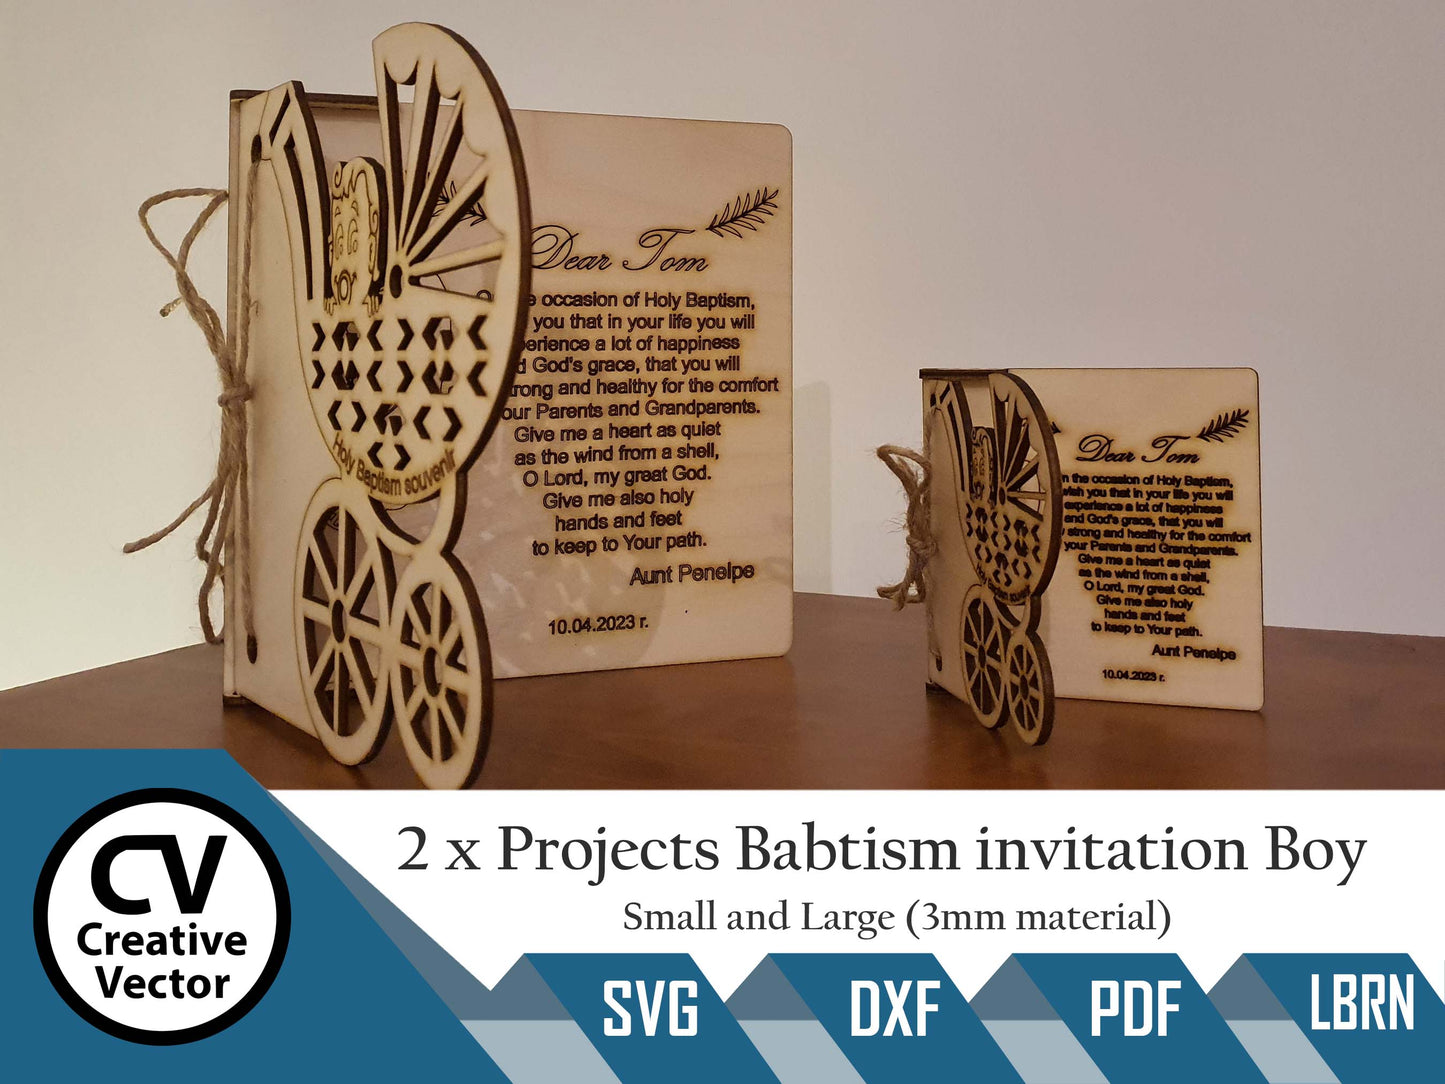 2 x Projects small and Large Baptism Invitation for Boy